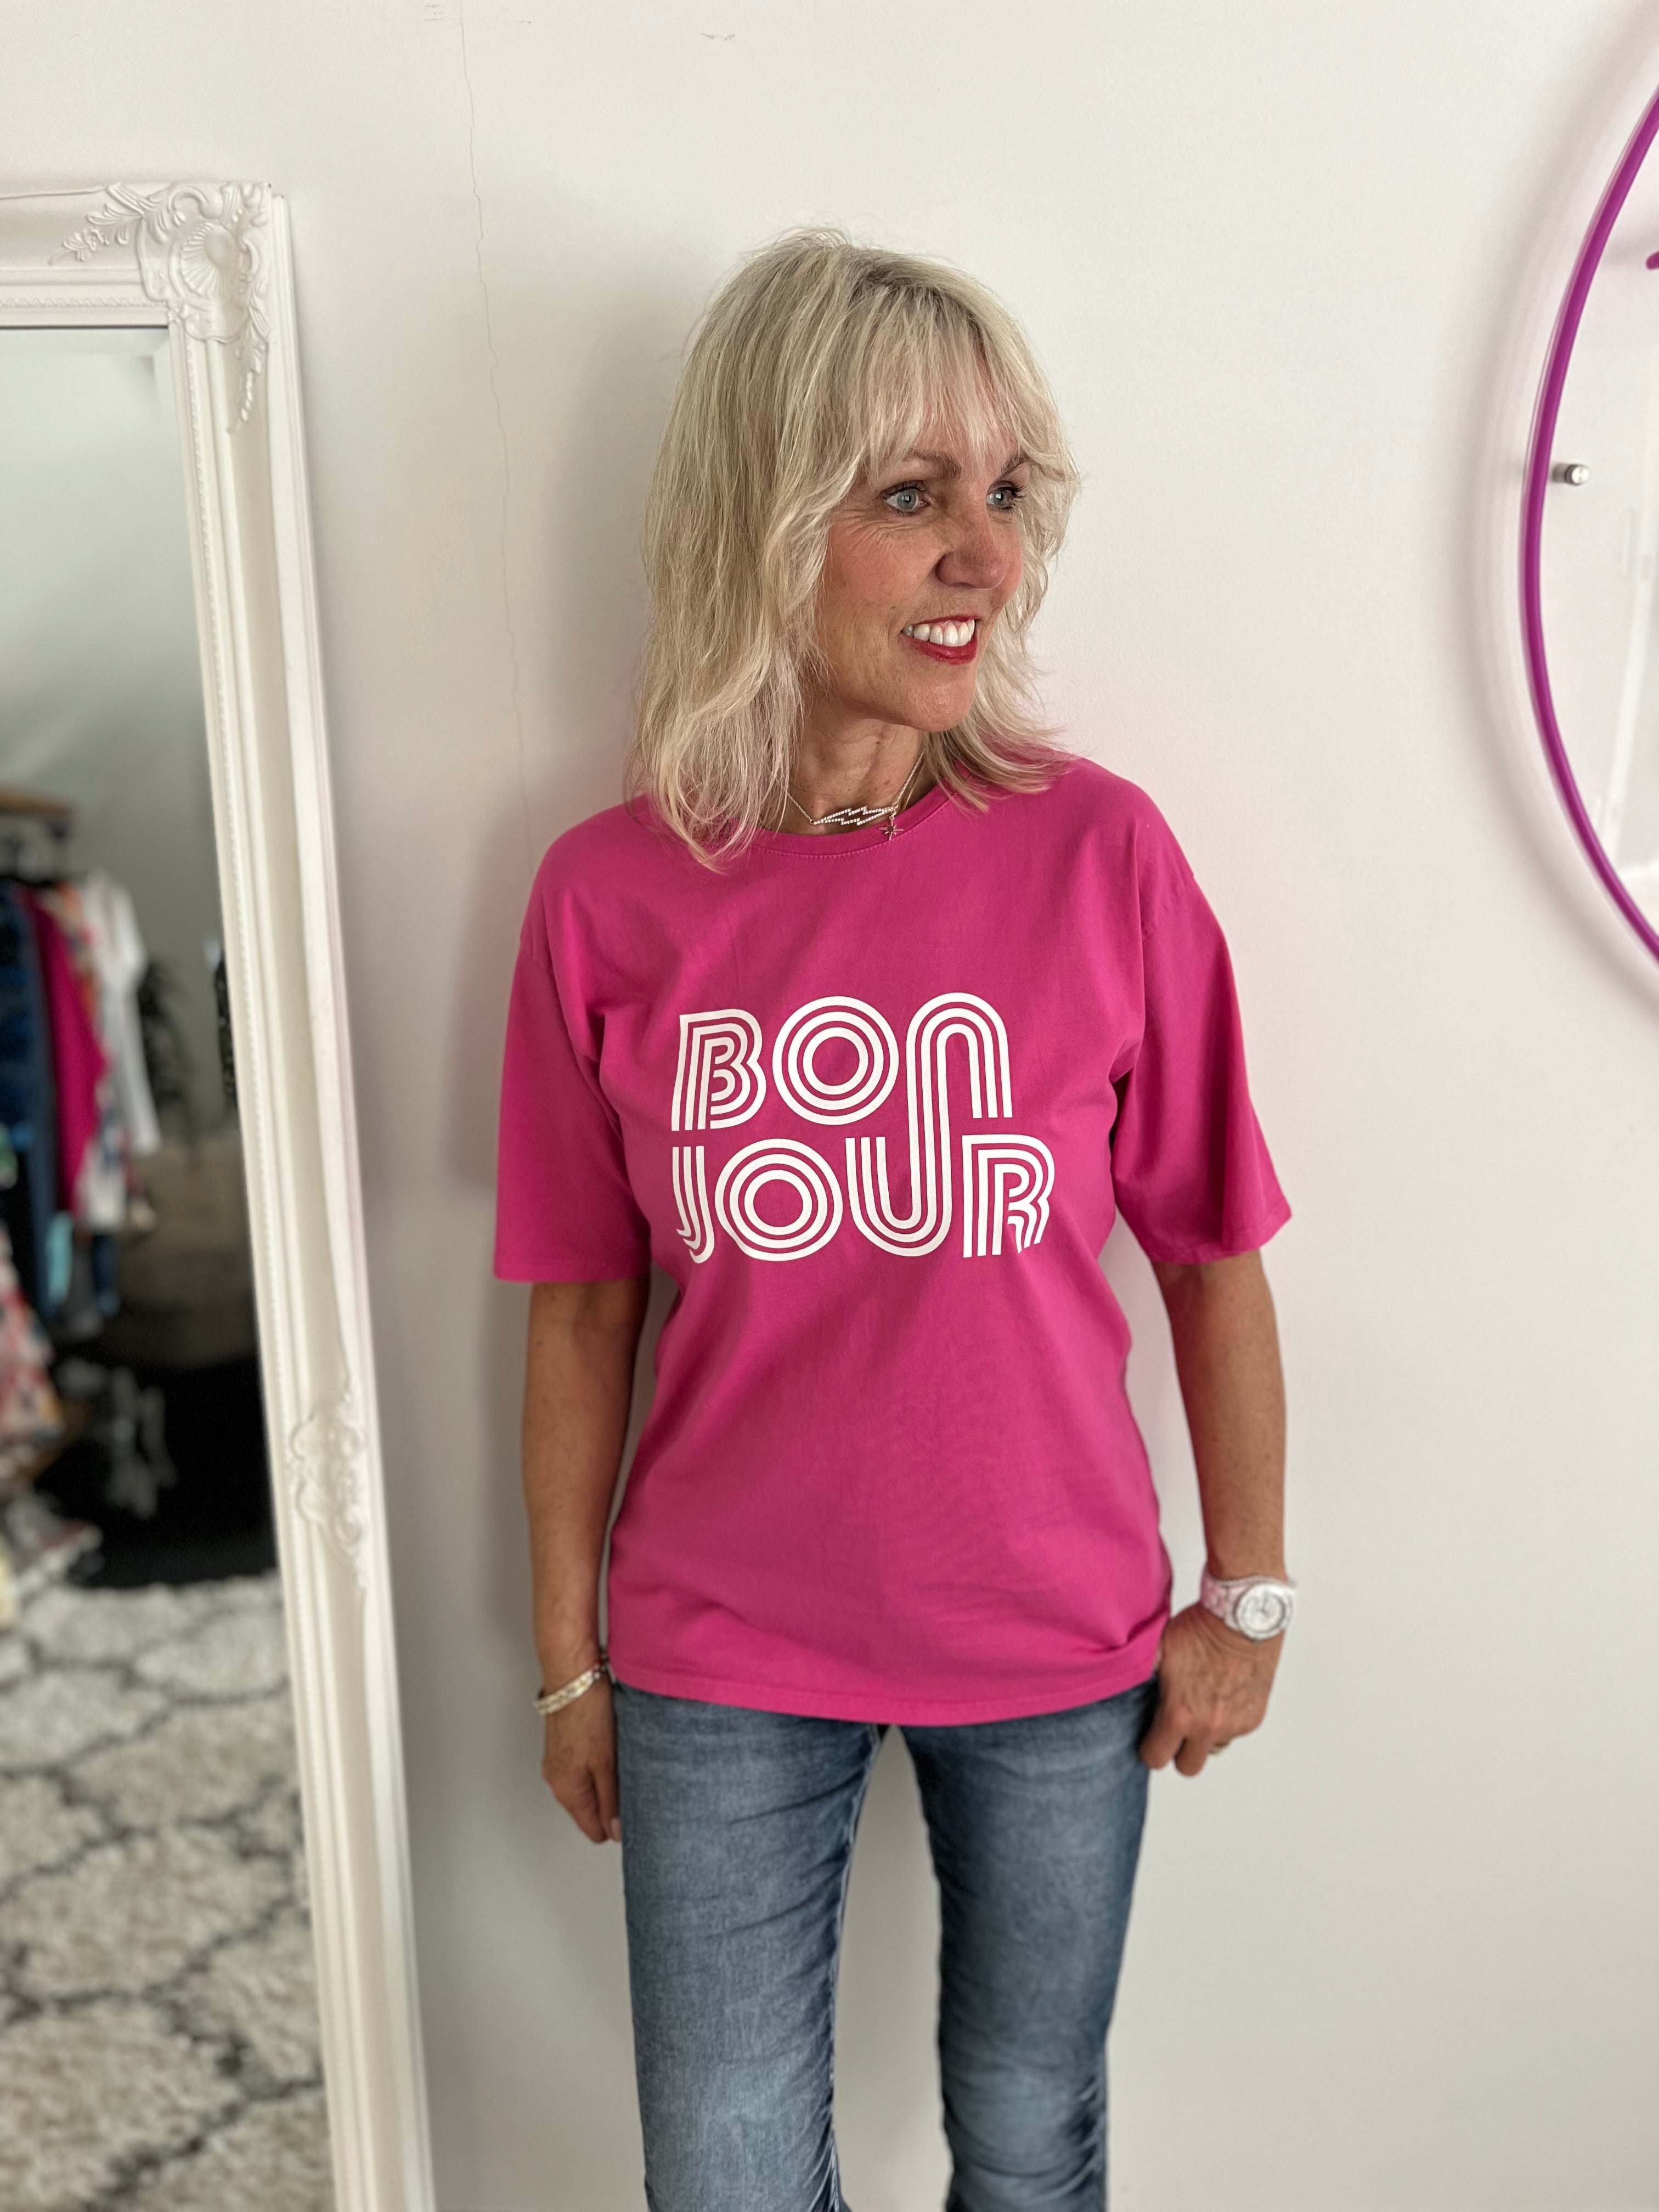 Bonjour Tee in Pink